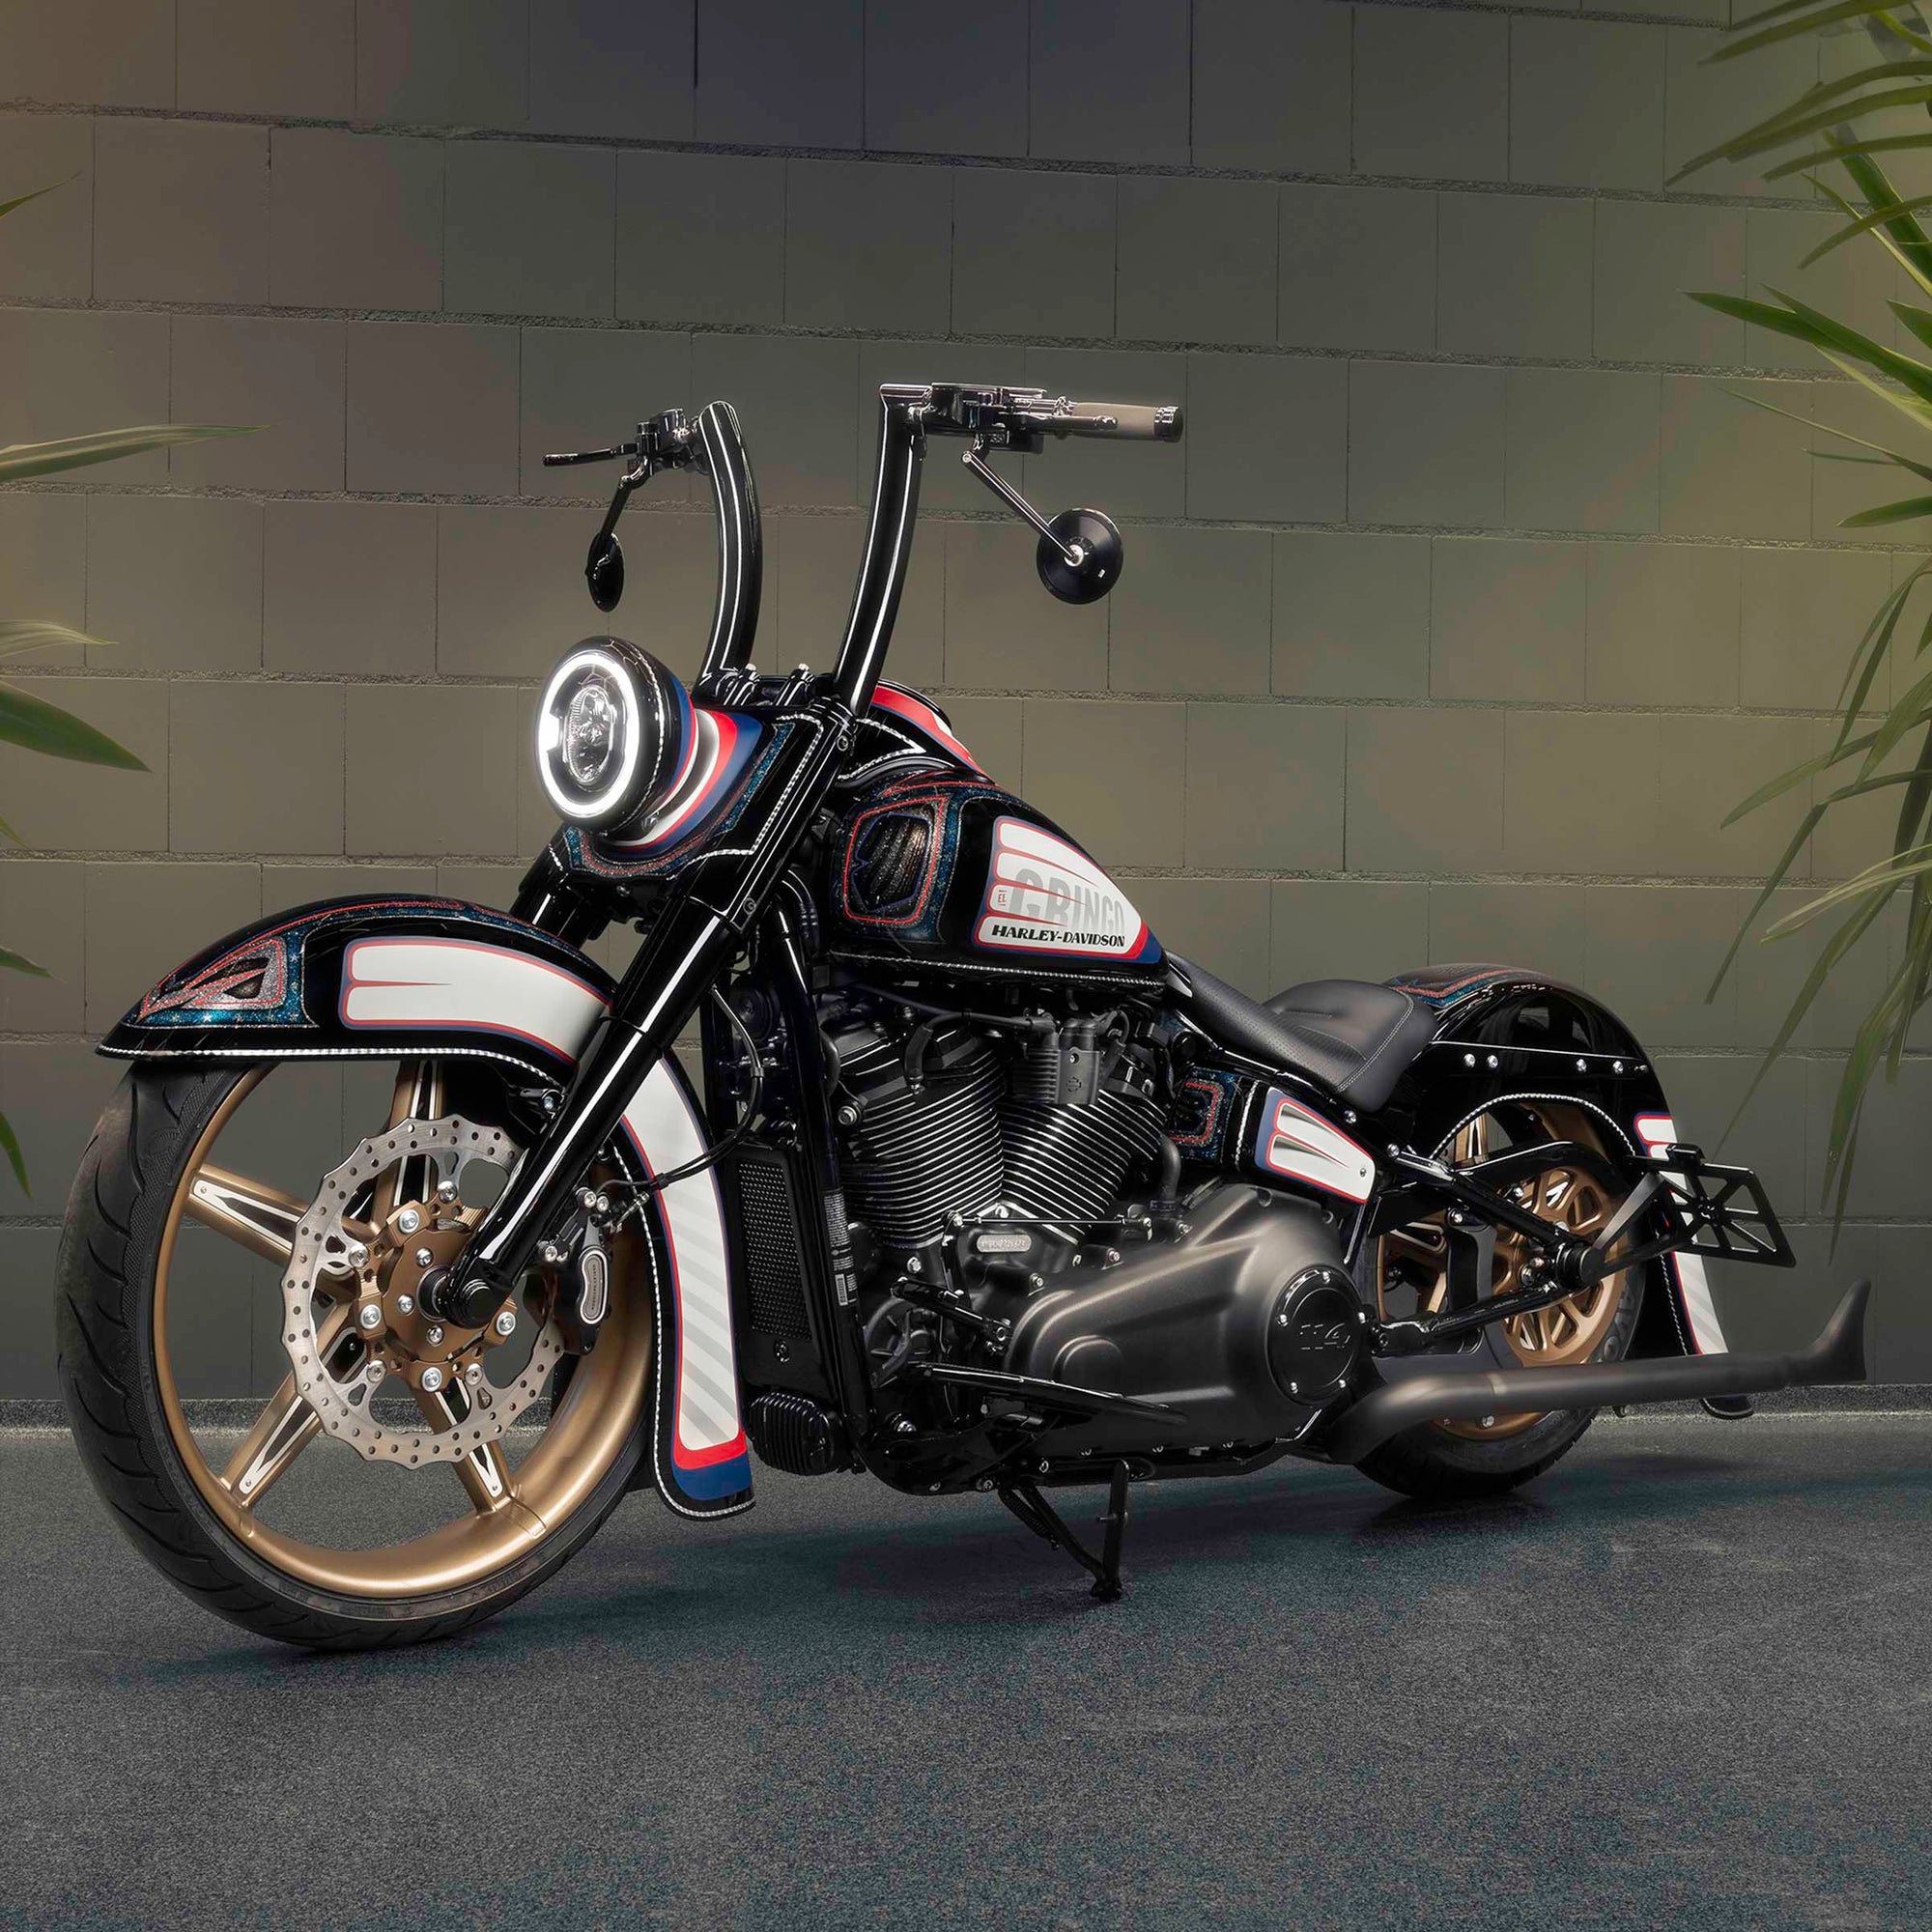 Modified Harley Davidson Heritage motorcycle with Killer Custom parts from the side grey brick wall in the background